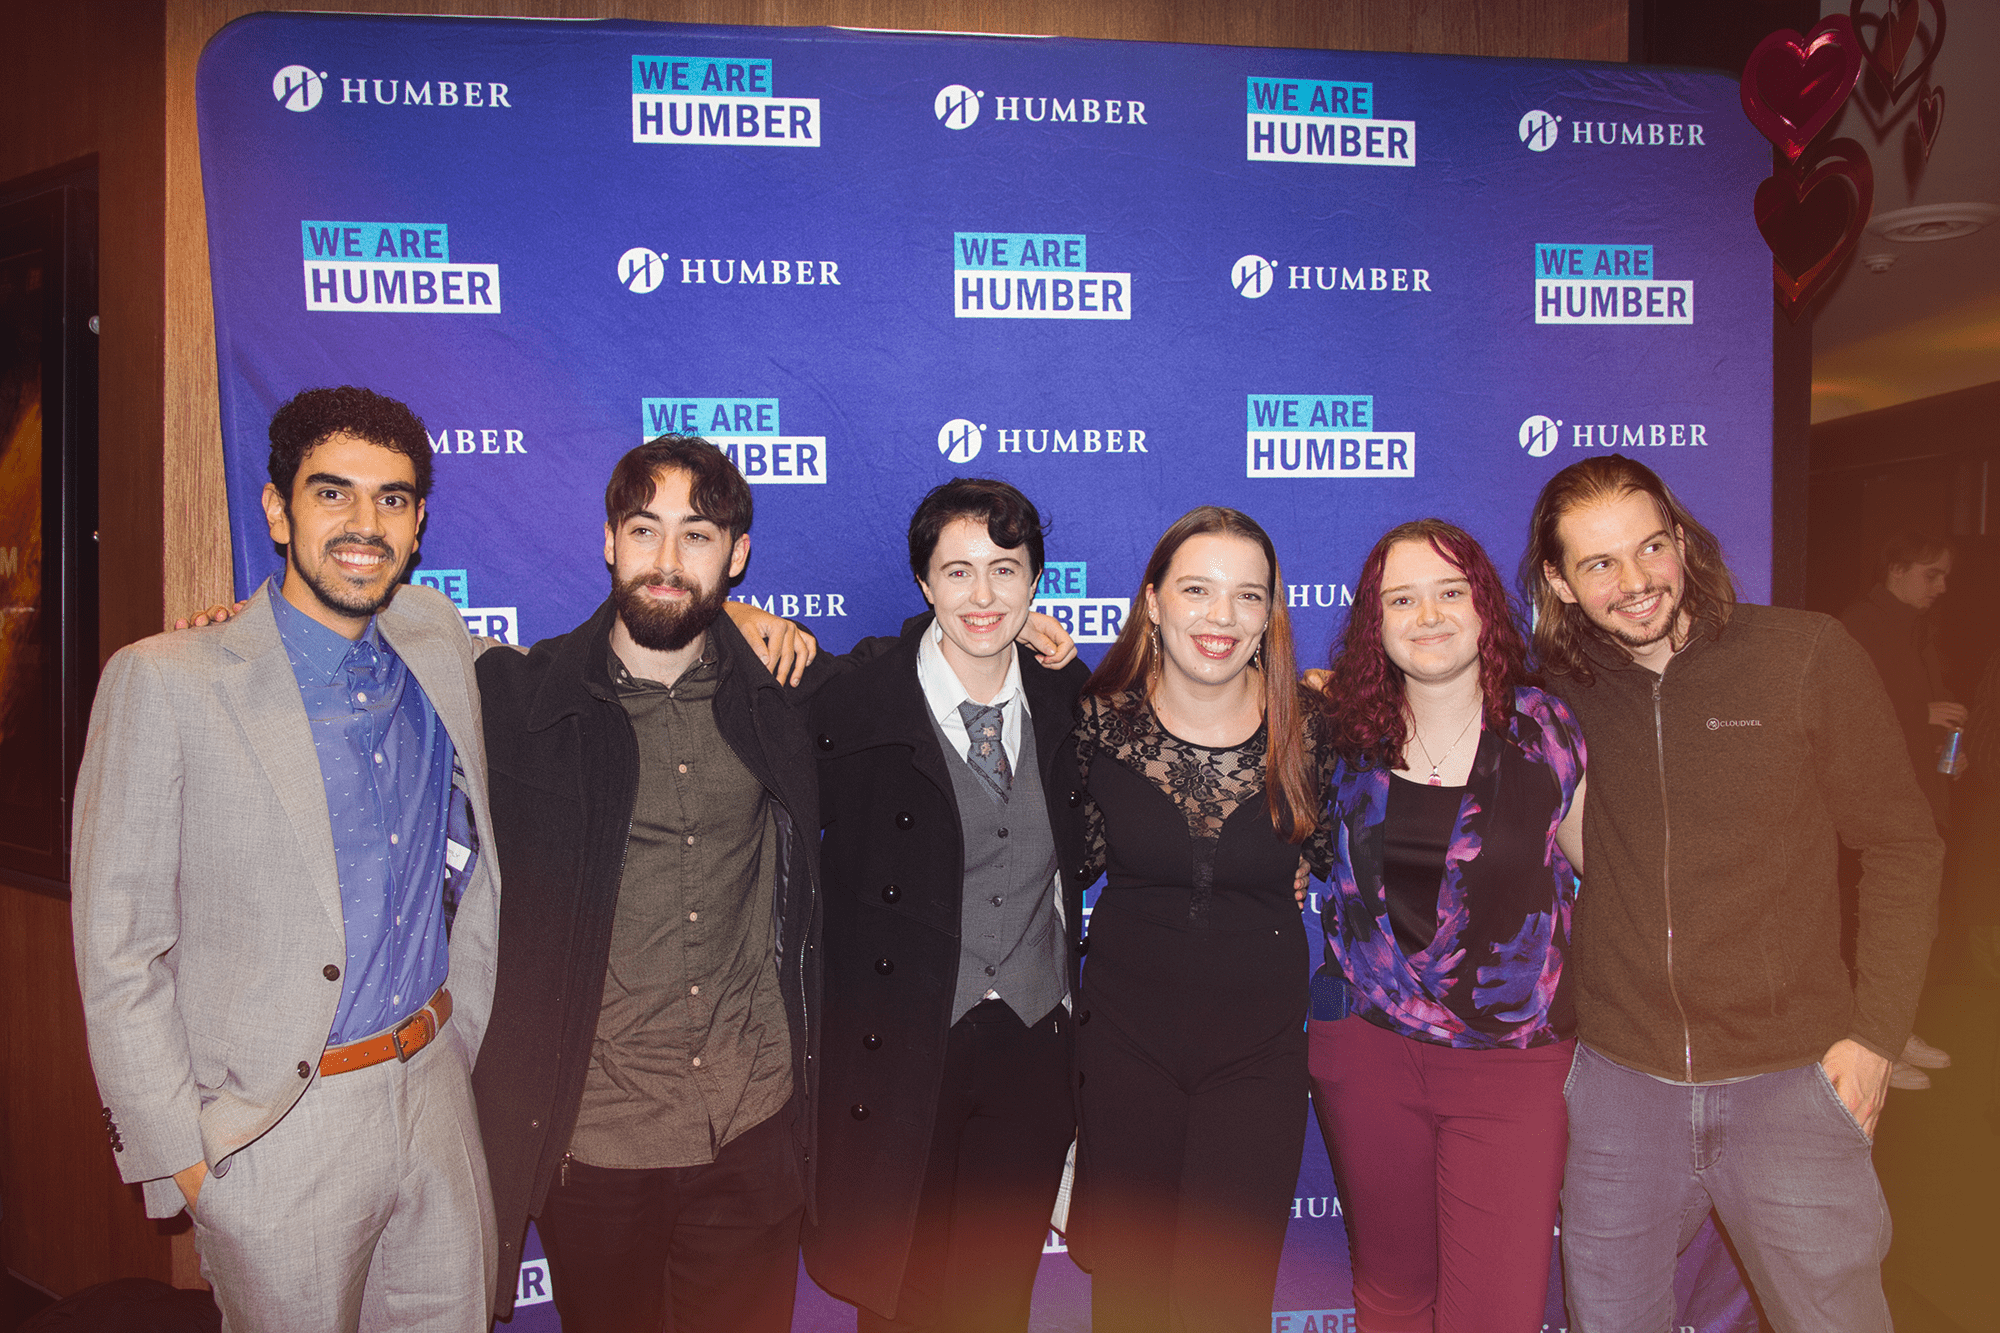 A group of six smiling people stand together in front of a blue backdrop with the Humber College logo on it.